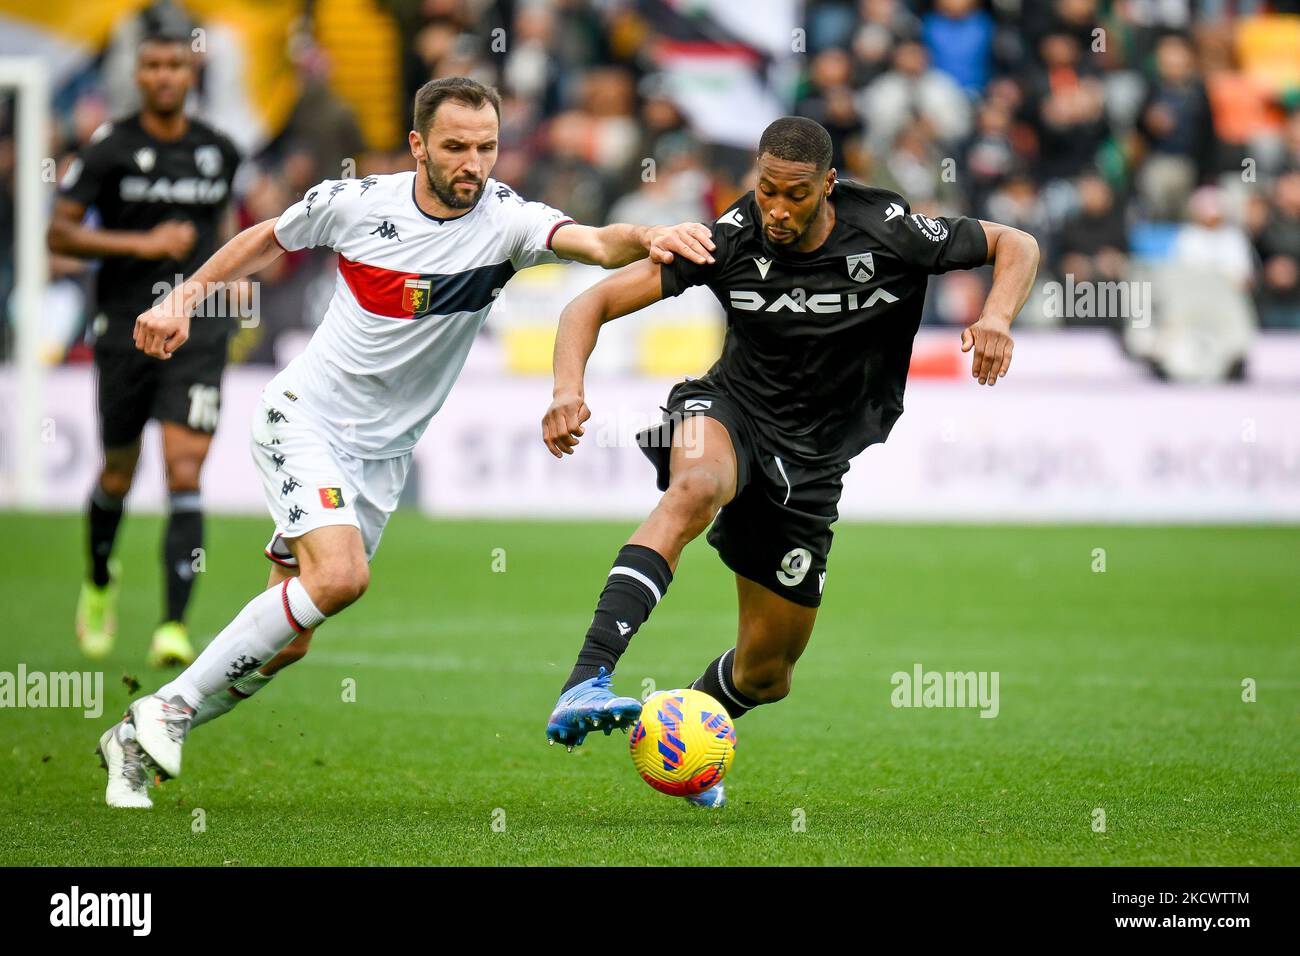 Norberto Bercique Gomes Betuncal (Udinese) hindered by Milan Badelj (Genoa) during the italian soccer Serie A match Udinese Calcio vs Genoa CFC on November 28, 2021 at the Friuli - Dacia Arena stadium in Udine, Italy (Photo by Ettore Griffoni/LiveMedia/NurPhoto) Stock Photo